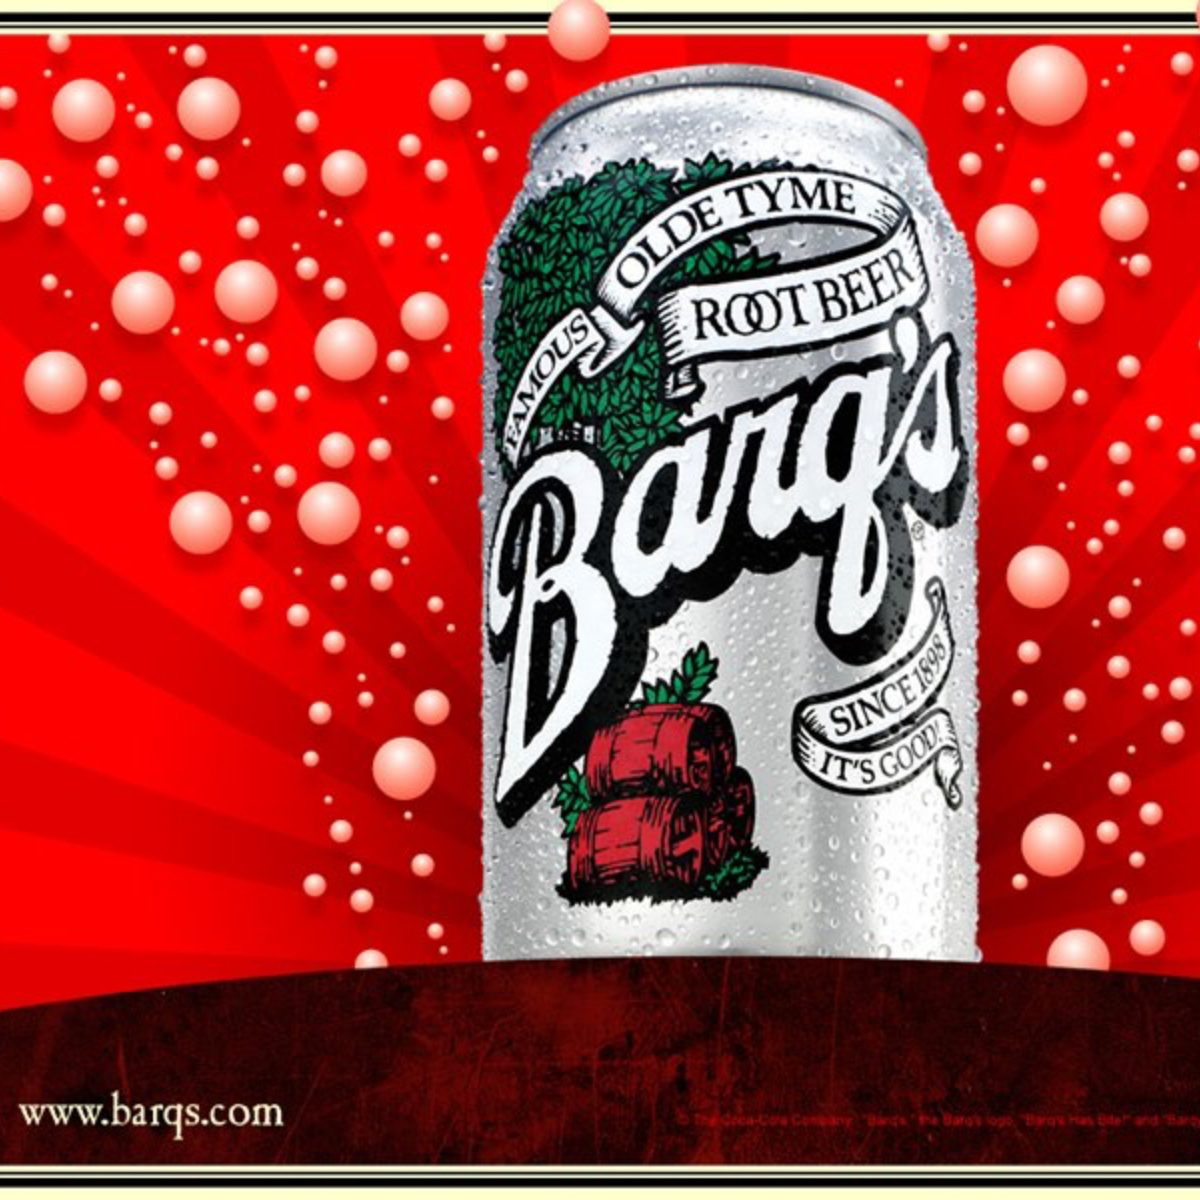 <p><strong><a class="SWhtmlLink" href="https://www.barqs.com" rel="noopener">Barq's Root Beer</a>, Biloxi</strong></p> <p>In 1898, Edward Charles Edmond Barq, Sr., moved to the beach resort town of Biloxi and bottled his first root beer. The chemist-turned-mixologist immediately had a following with the uniquely-flavored beverage, but Prohibition really created the sales boom that put Barq's on the map.</p>